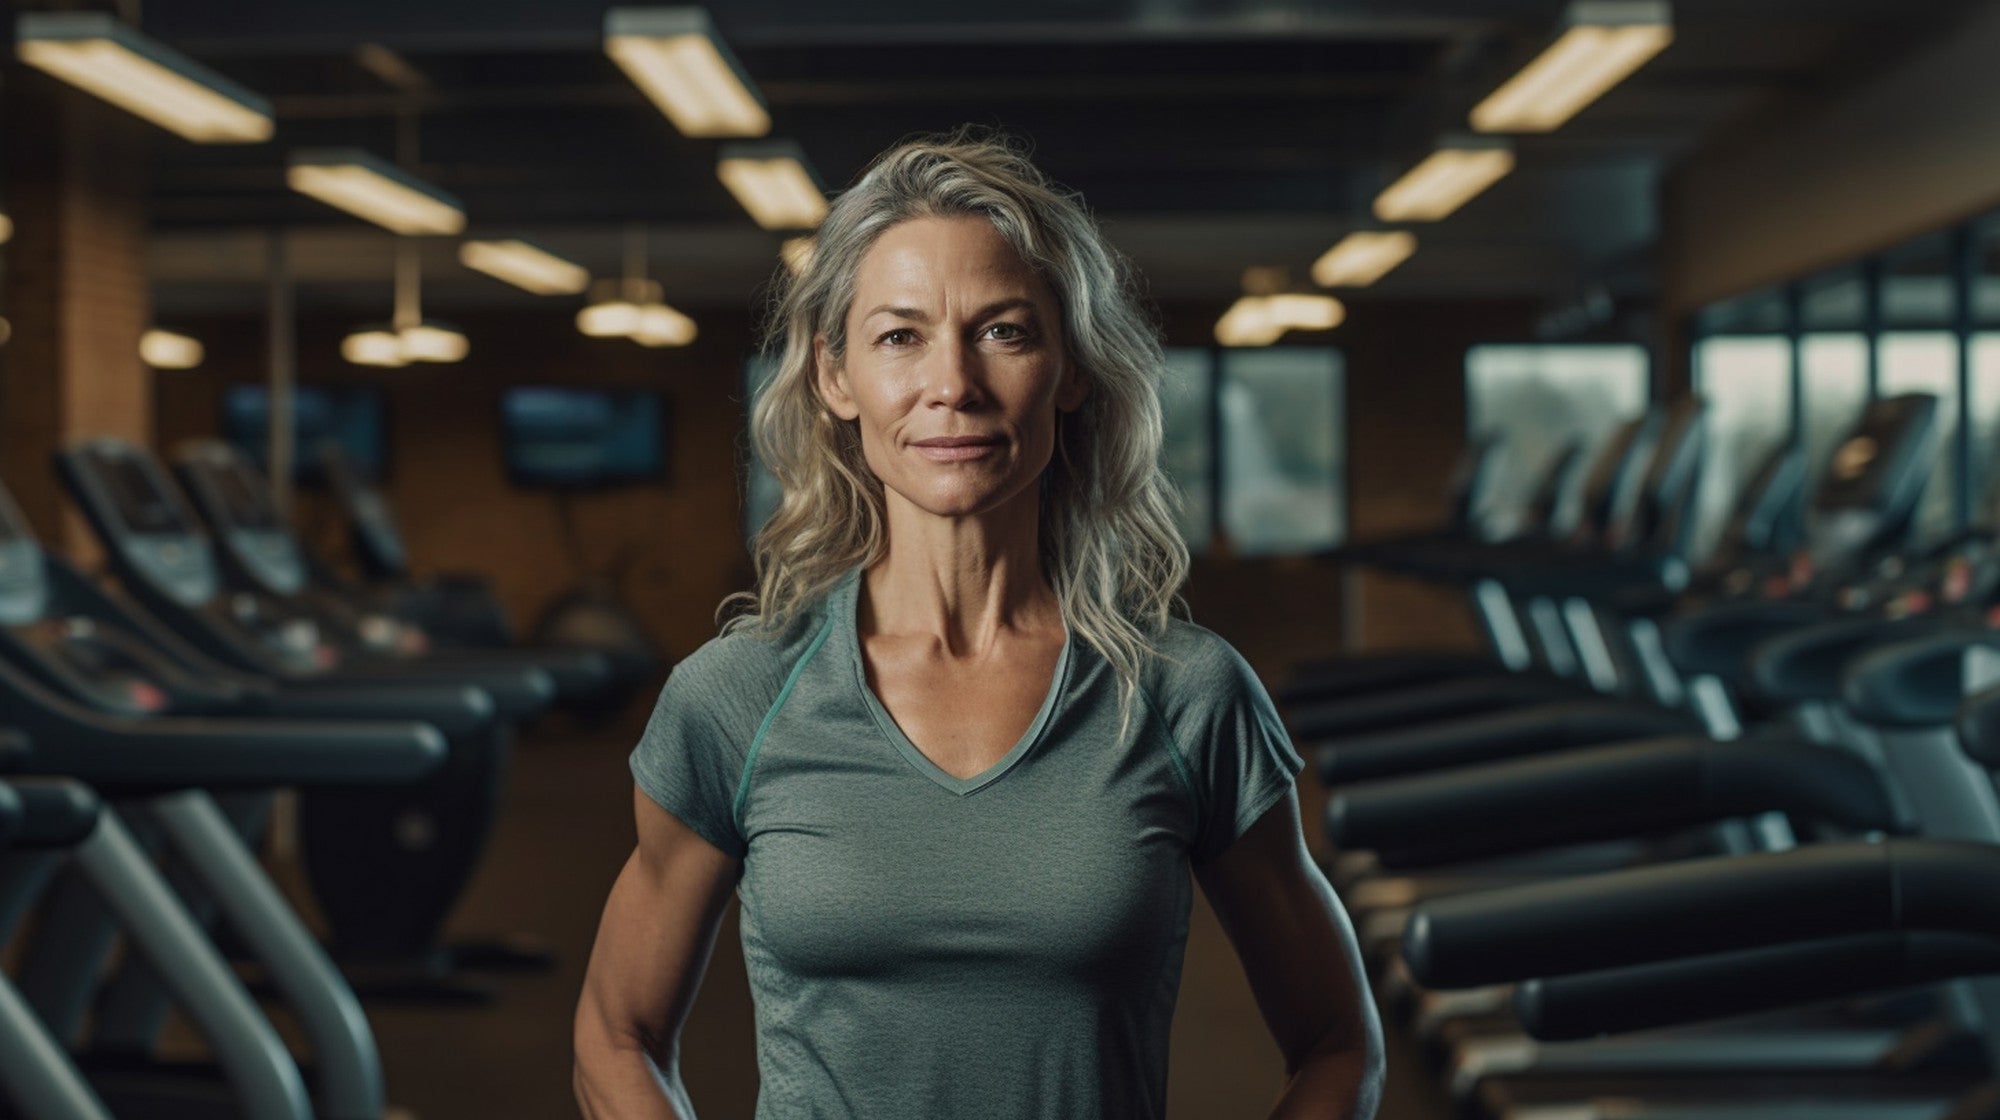 Middle aged Female Gym Owner AI art generated image by Pixel Gallery